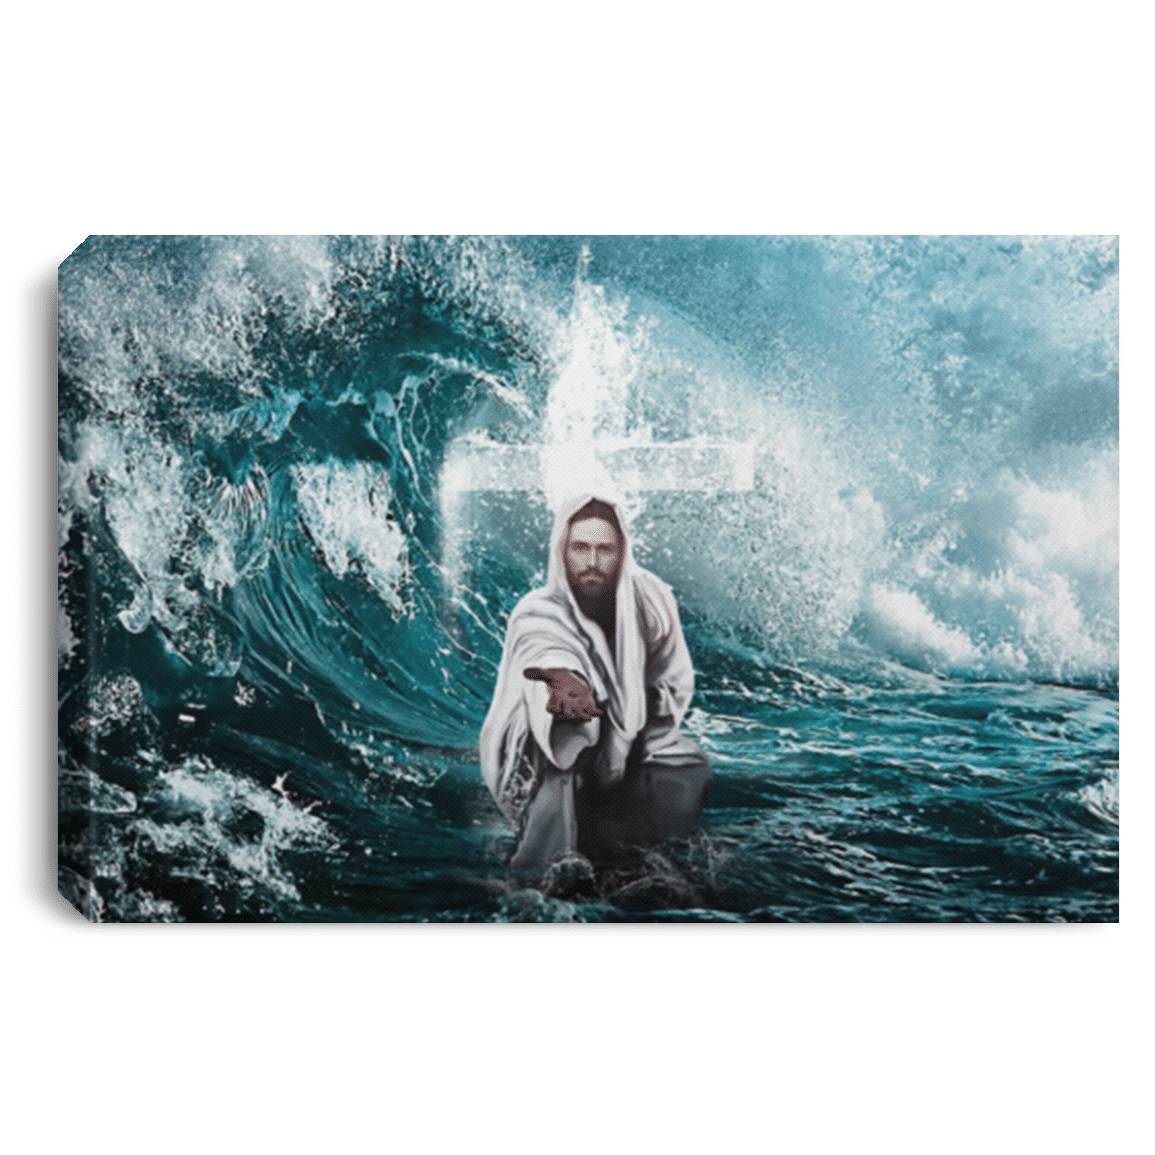 Focus On Me Not The Storm Jesus Framed Canvas Wall Art Style: Landscape Canvas, Color: White